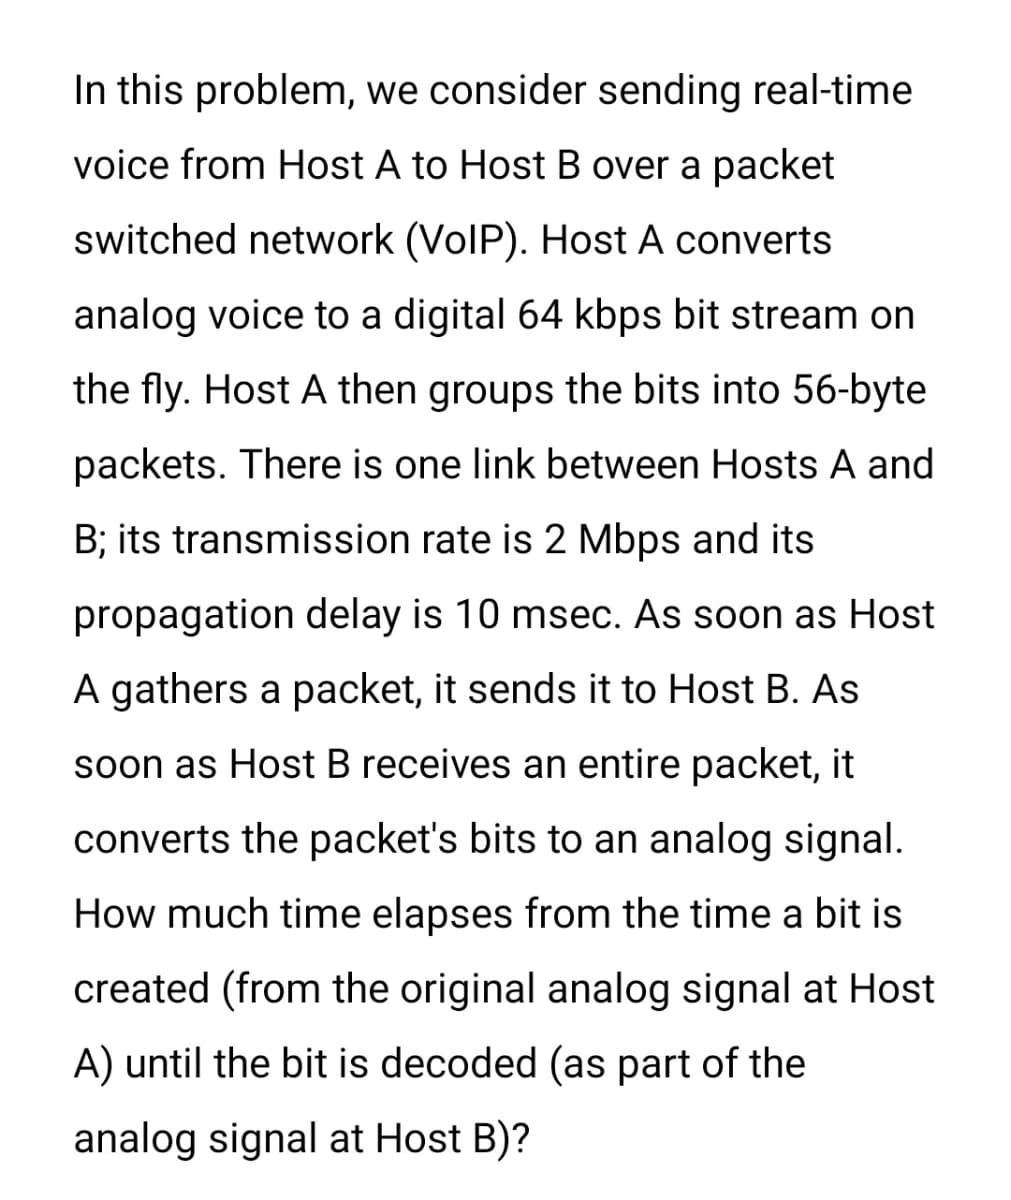 In this problem, we consider sending real-time
voice from Host A to Host B over a packet
switched network (VoIP). Host A converts
analog voice to a digital 64 kbps bit stream on
the fly. Host A then groups the bits into 56-byte
packets. There is one link between Hosts A and
B; its transmission rate is 2 Mbps and its
propagation delay is 10 msec. As soon as Host
A gathers a packet, it sends it to Host B. As
soon as Host B receives an entire packet, it
converts the packet's bits to an analog signal.
How much time elapses from the time a bit is
created (from the original analog signal at Host
A) until the bit is decoded (as part of the
analog signal at Host B)?